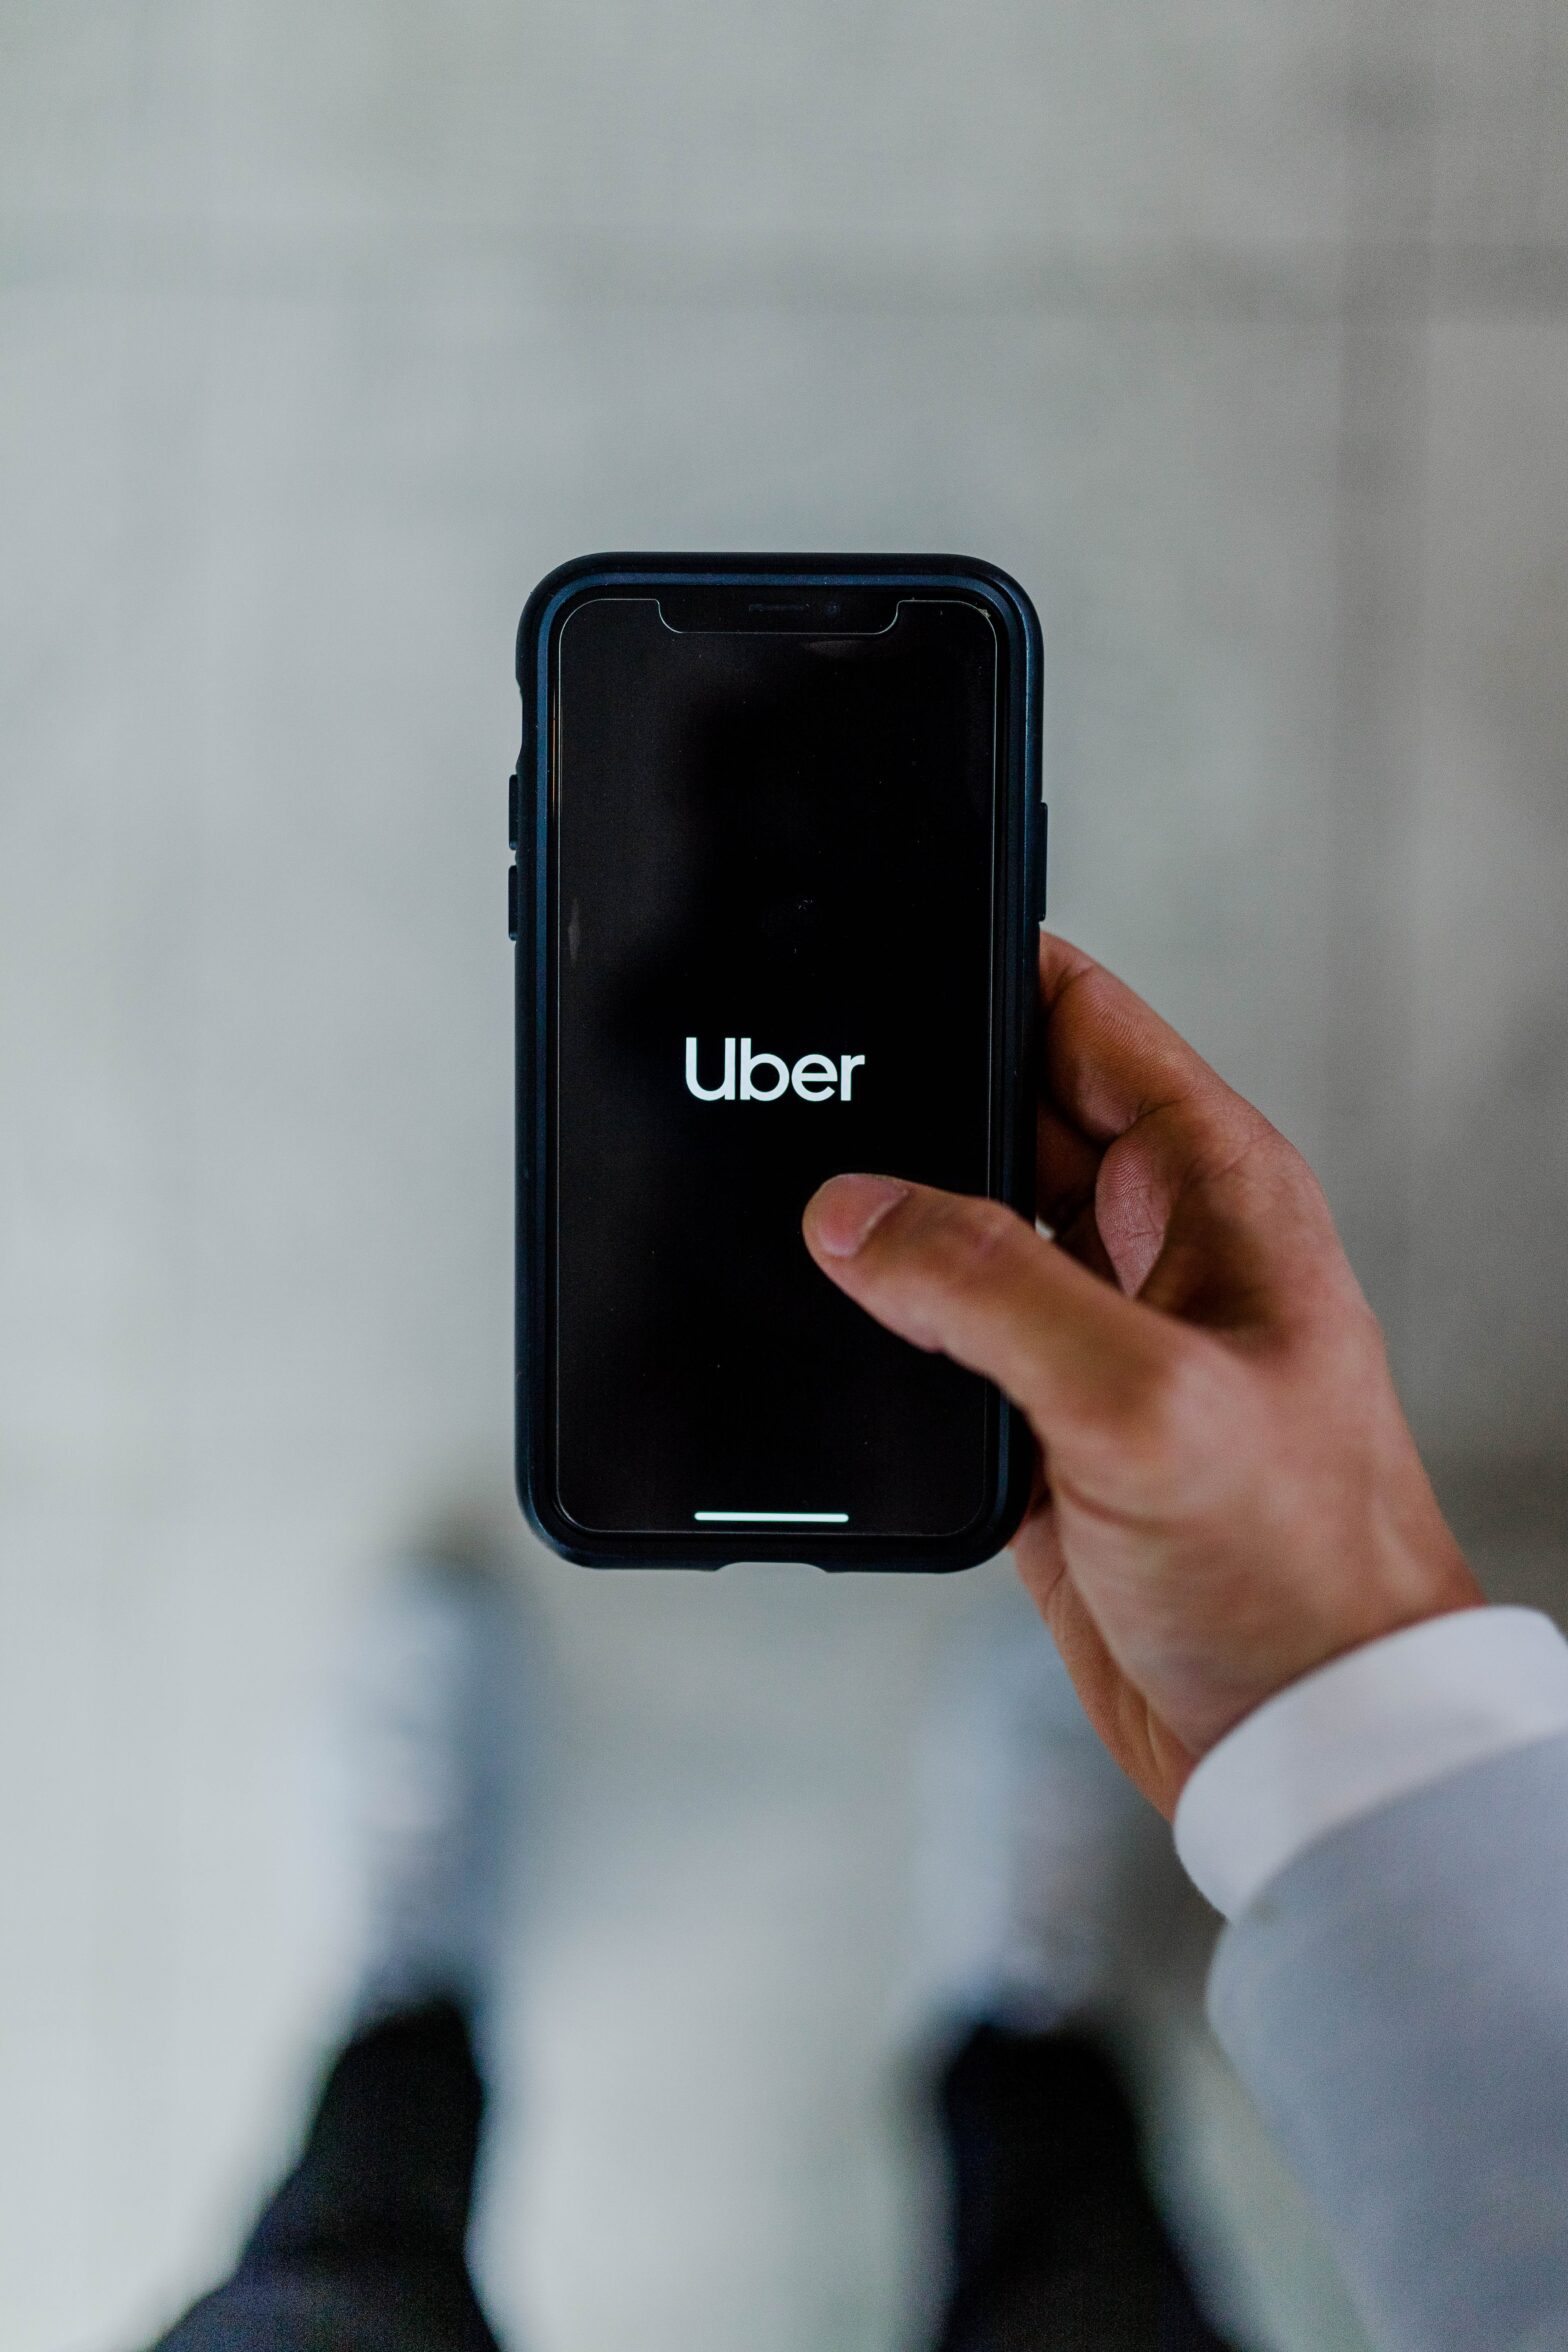 Uber Ventures Into Flight Bookings As Part Of UK Travel "Super App" Strategy